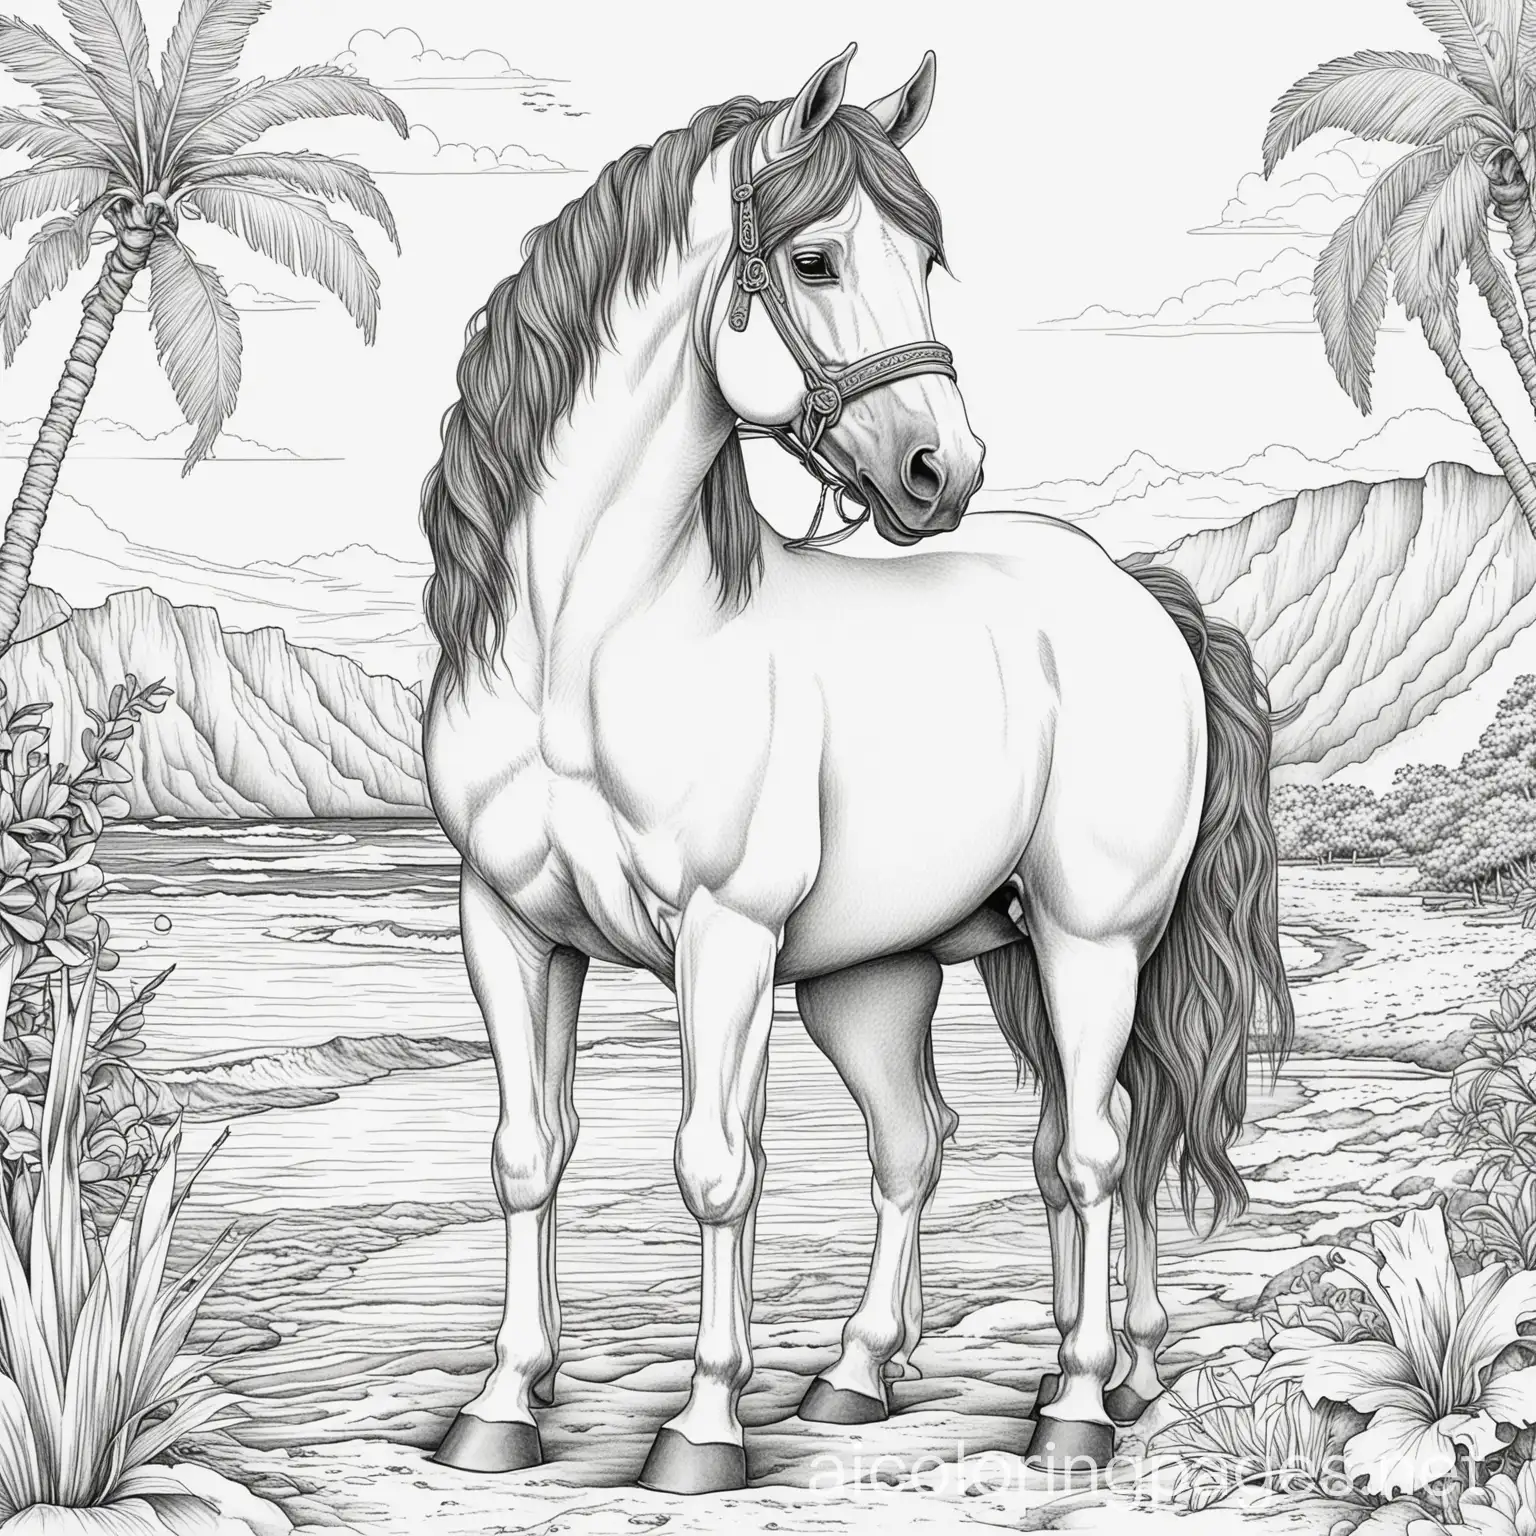 A horse in Hawaii, Coloring Page, black and white, line art, white background, Simplicity, Ample White Space. The background of the coloring page is plain white to make it easy for young children to color within the lines. The outlines of all the subjects are easy to distinguish, making it simple for kids to color without too much difficulty